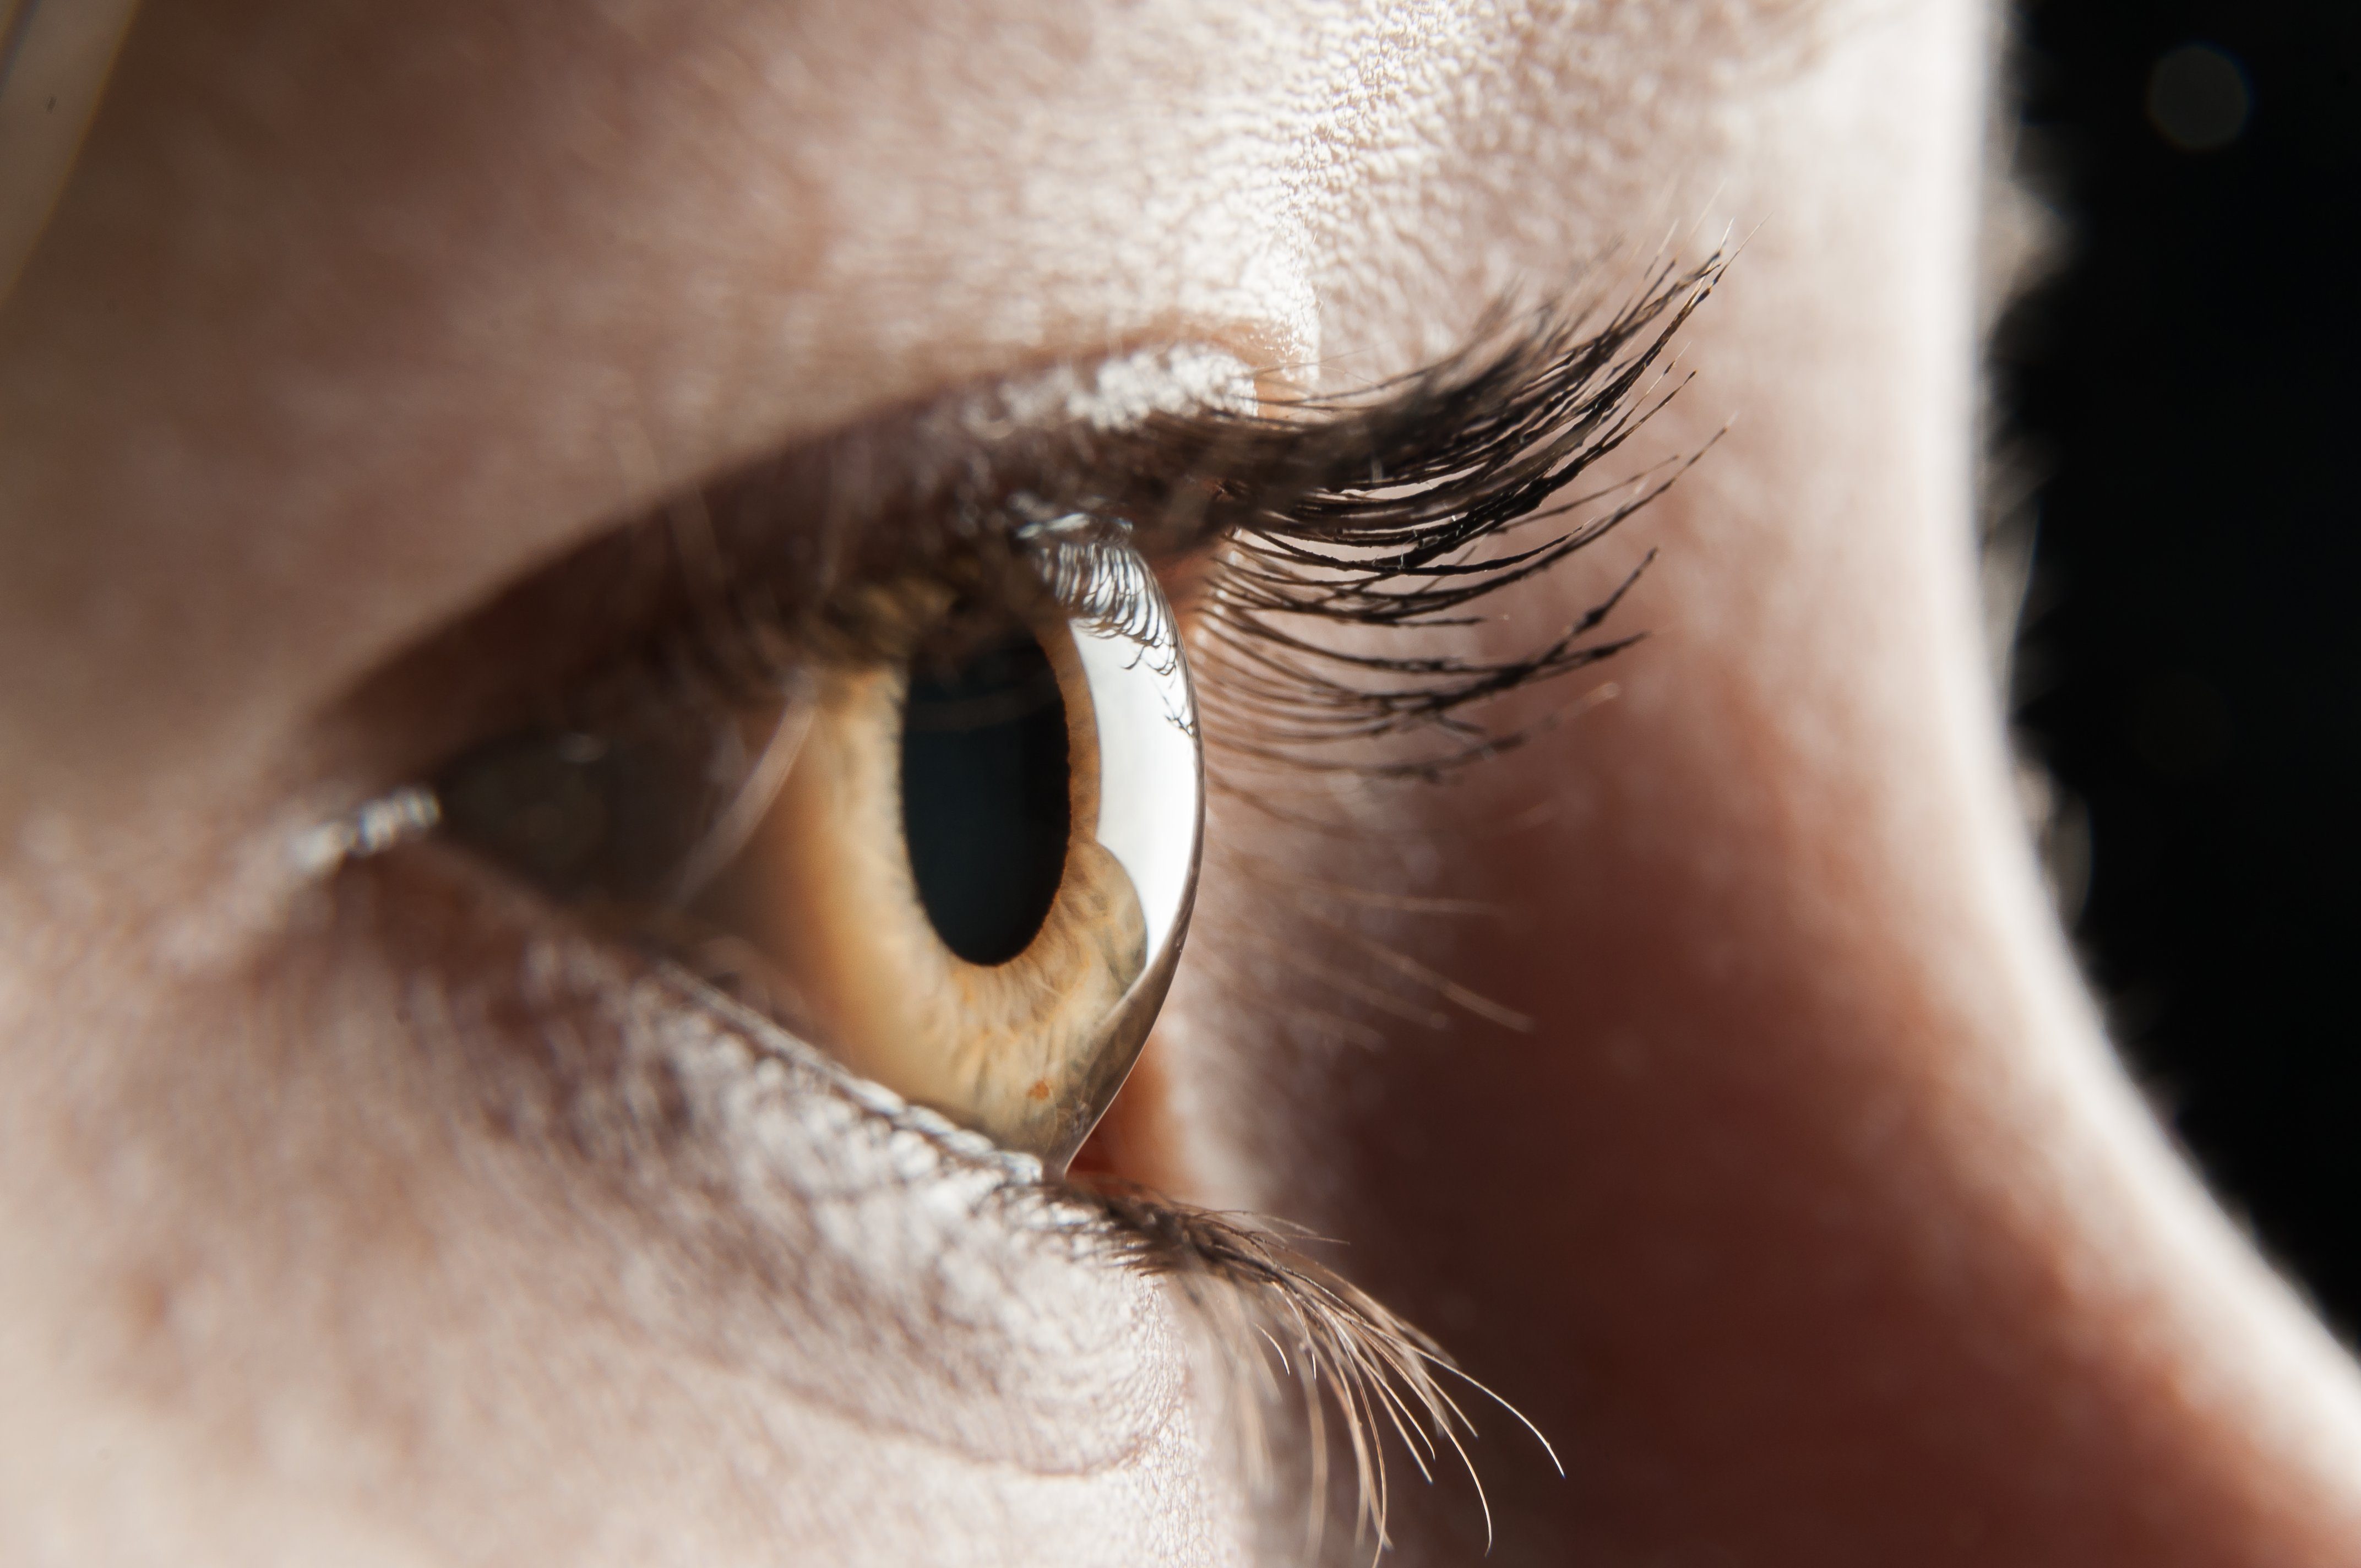 12 Signs You Need to Visit an Eye Doctor